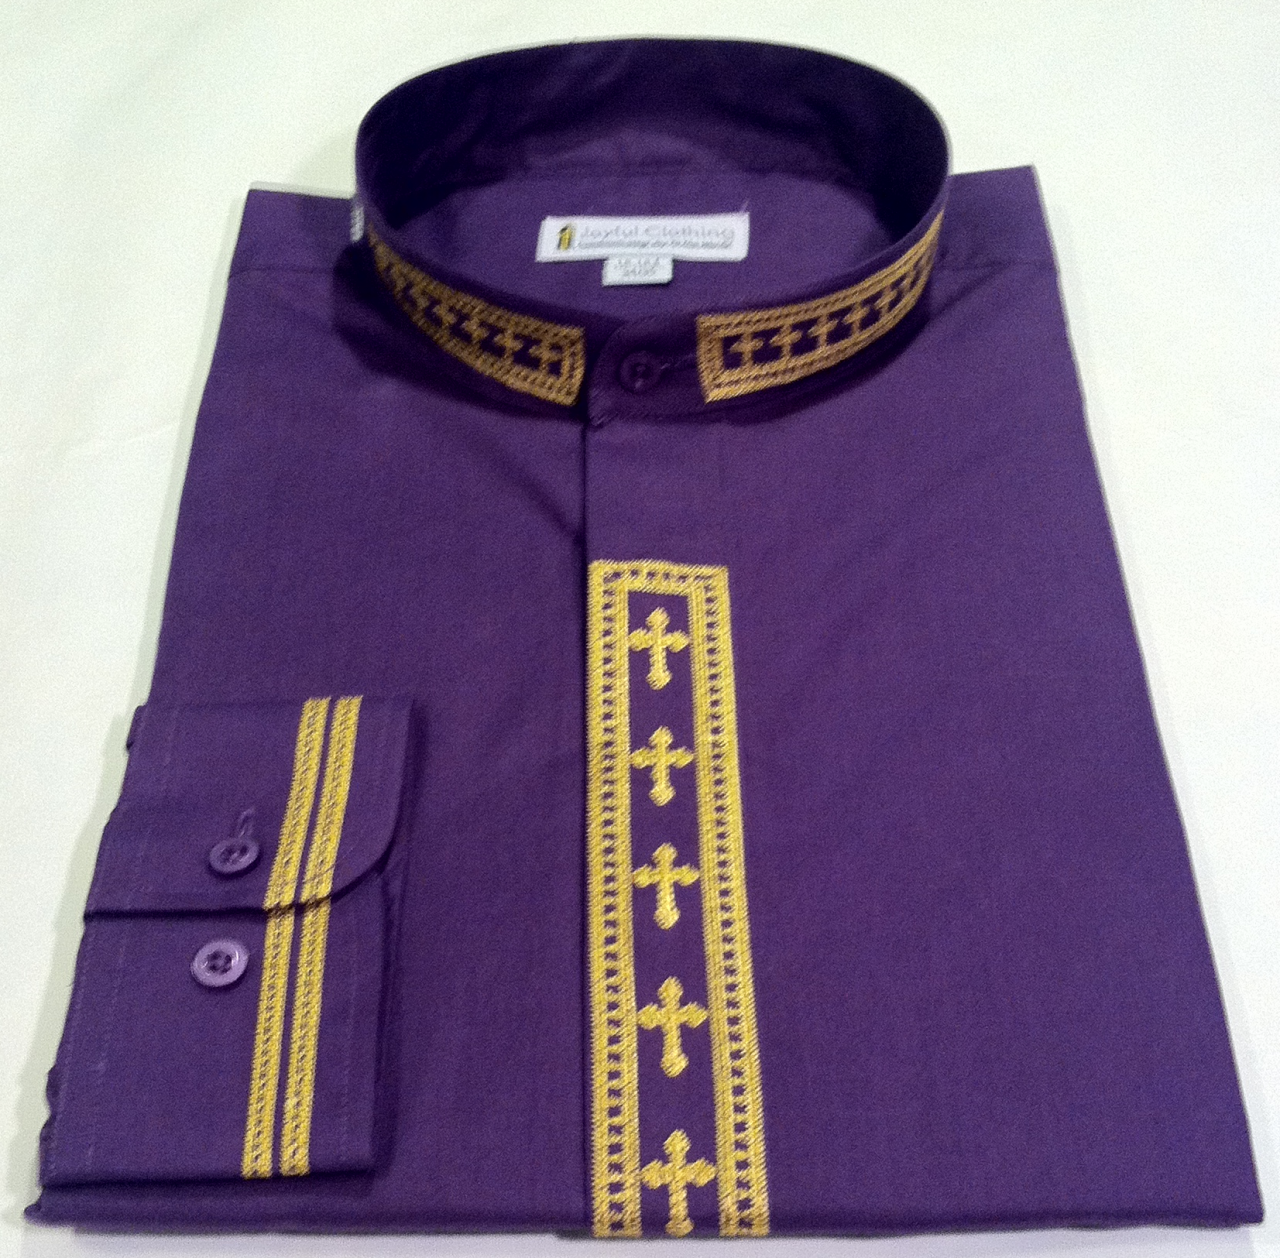 305. Men's Long-Sleeve Clergy Shirt With Fine Embroidery - Purple/Gold